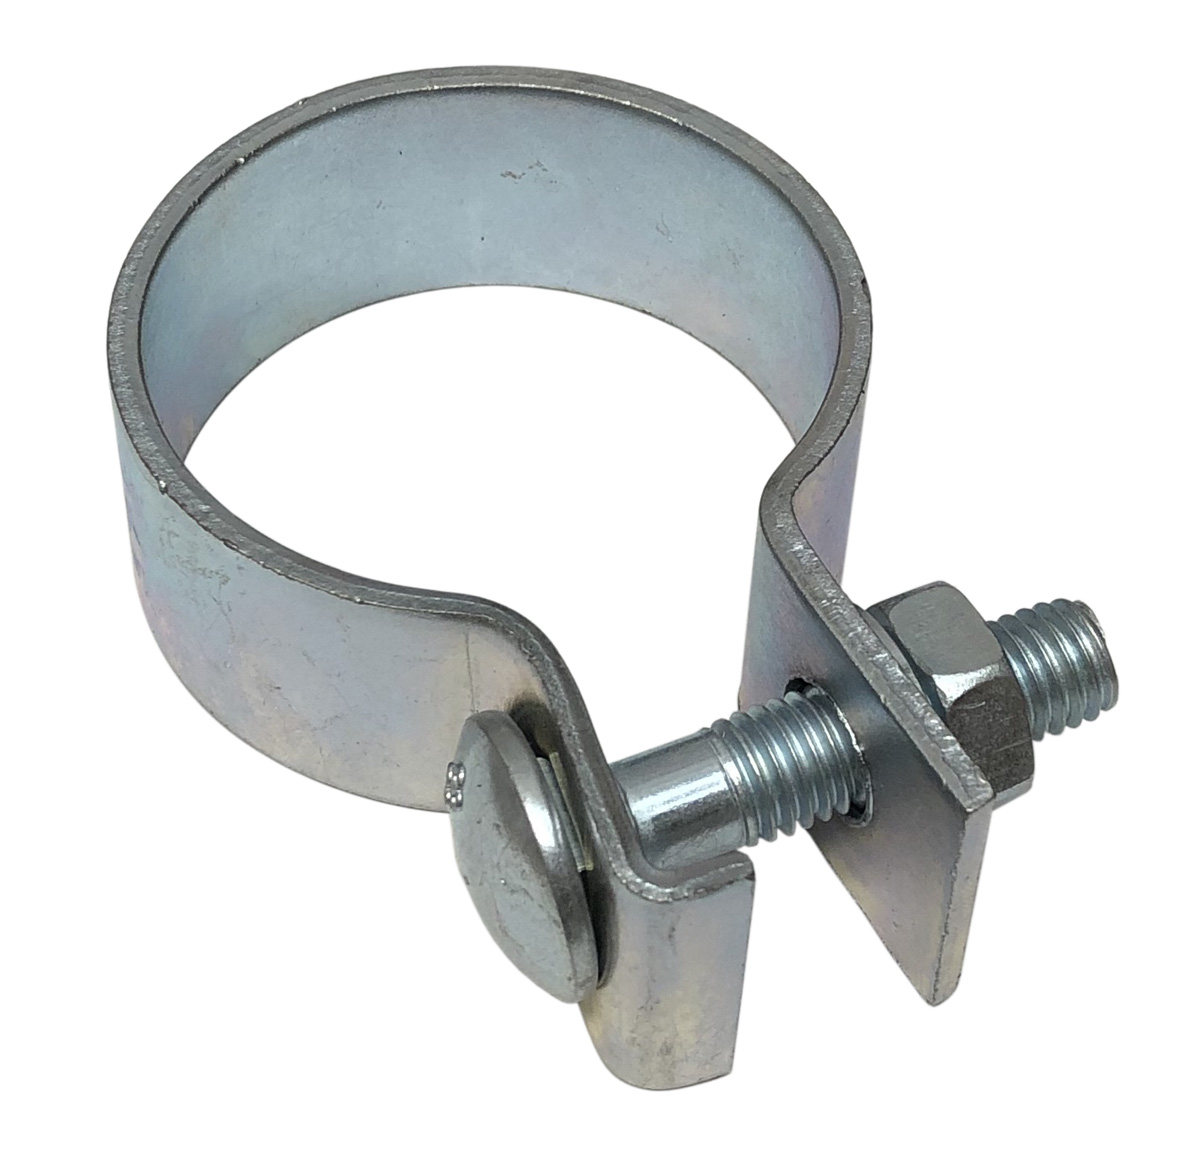 Ring Clamp